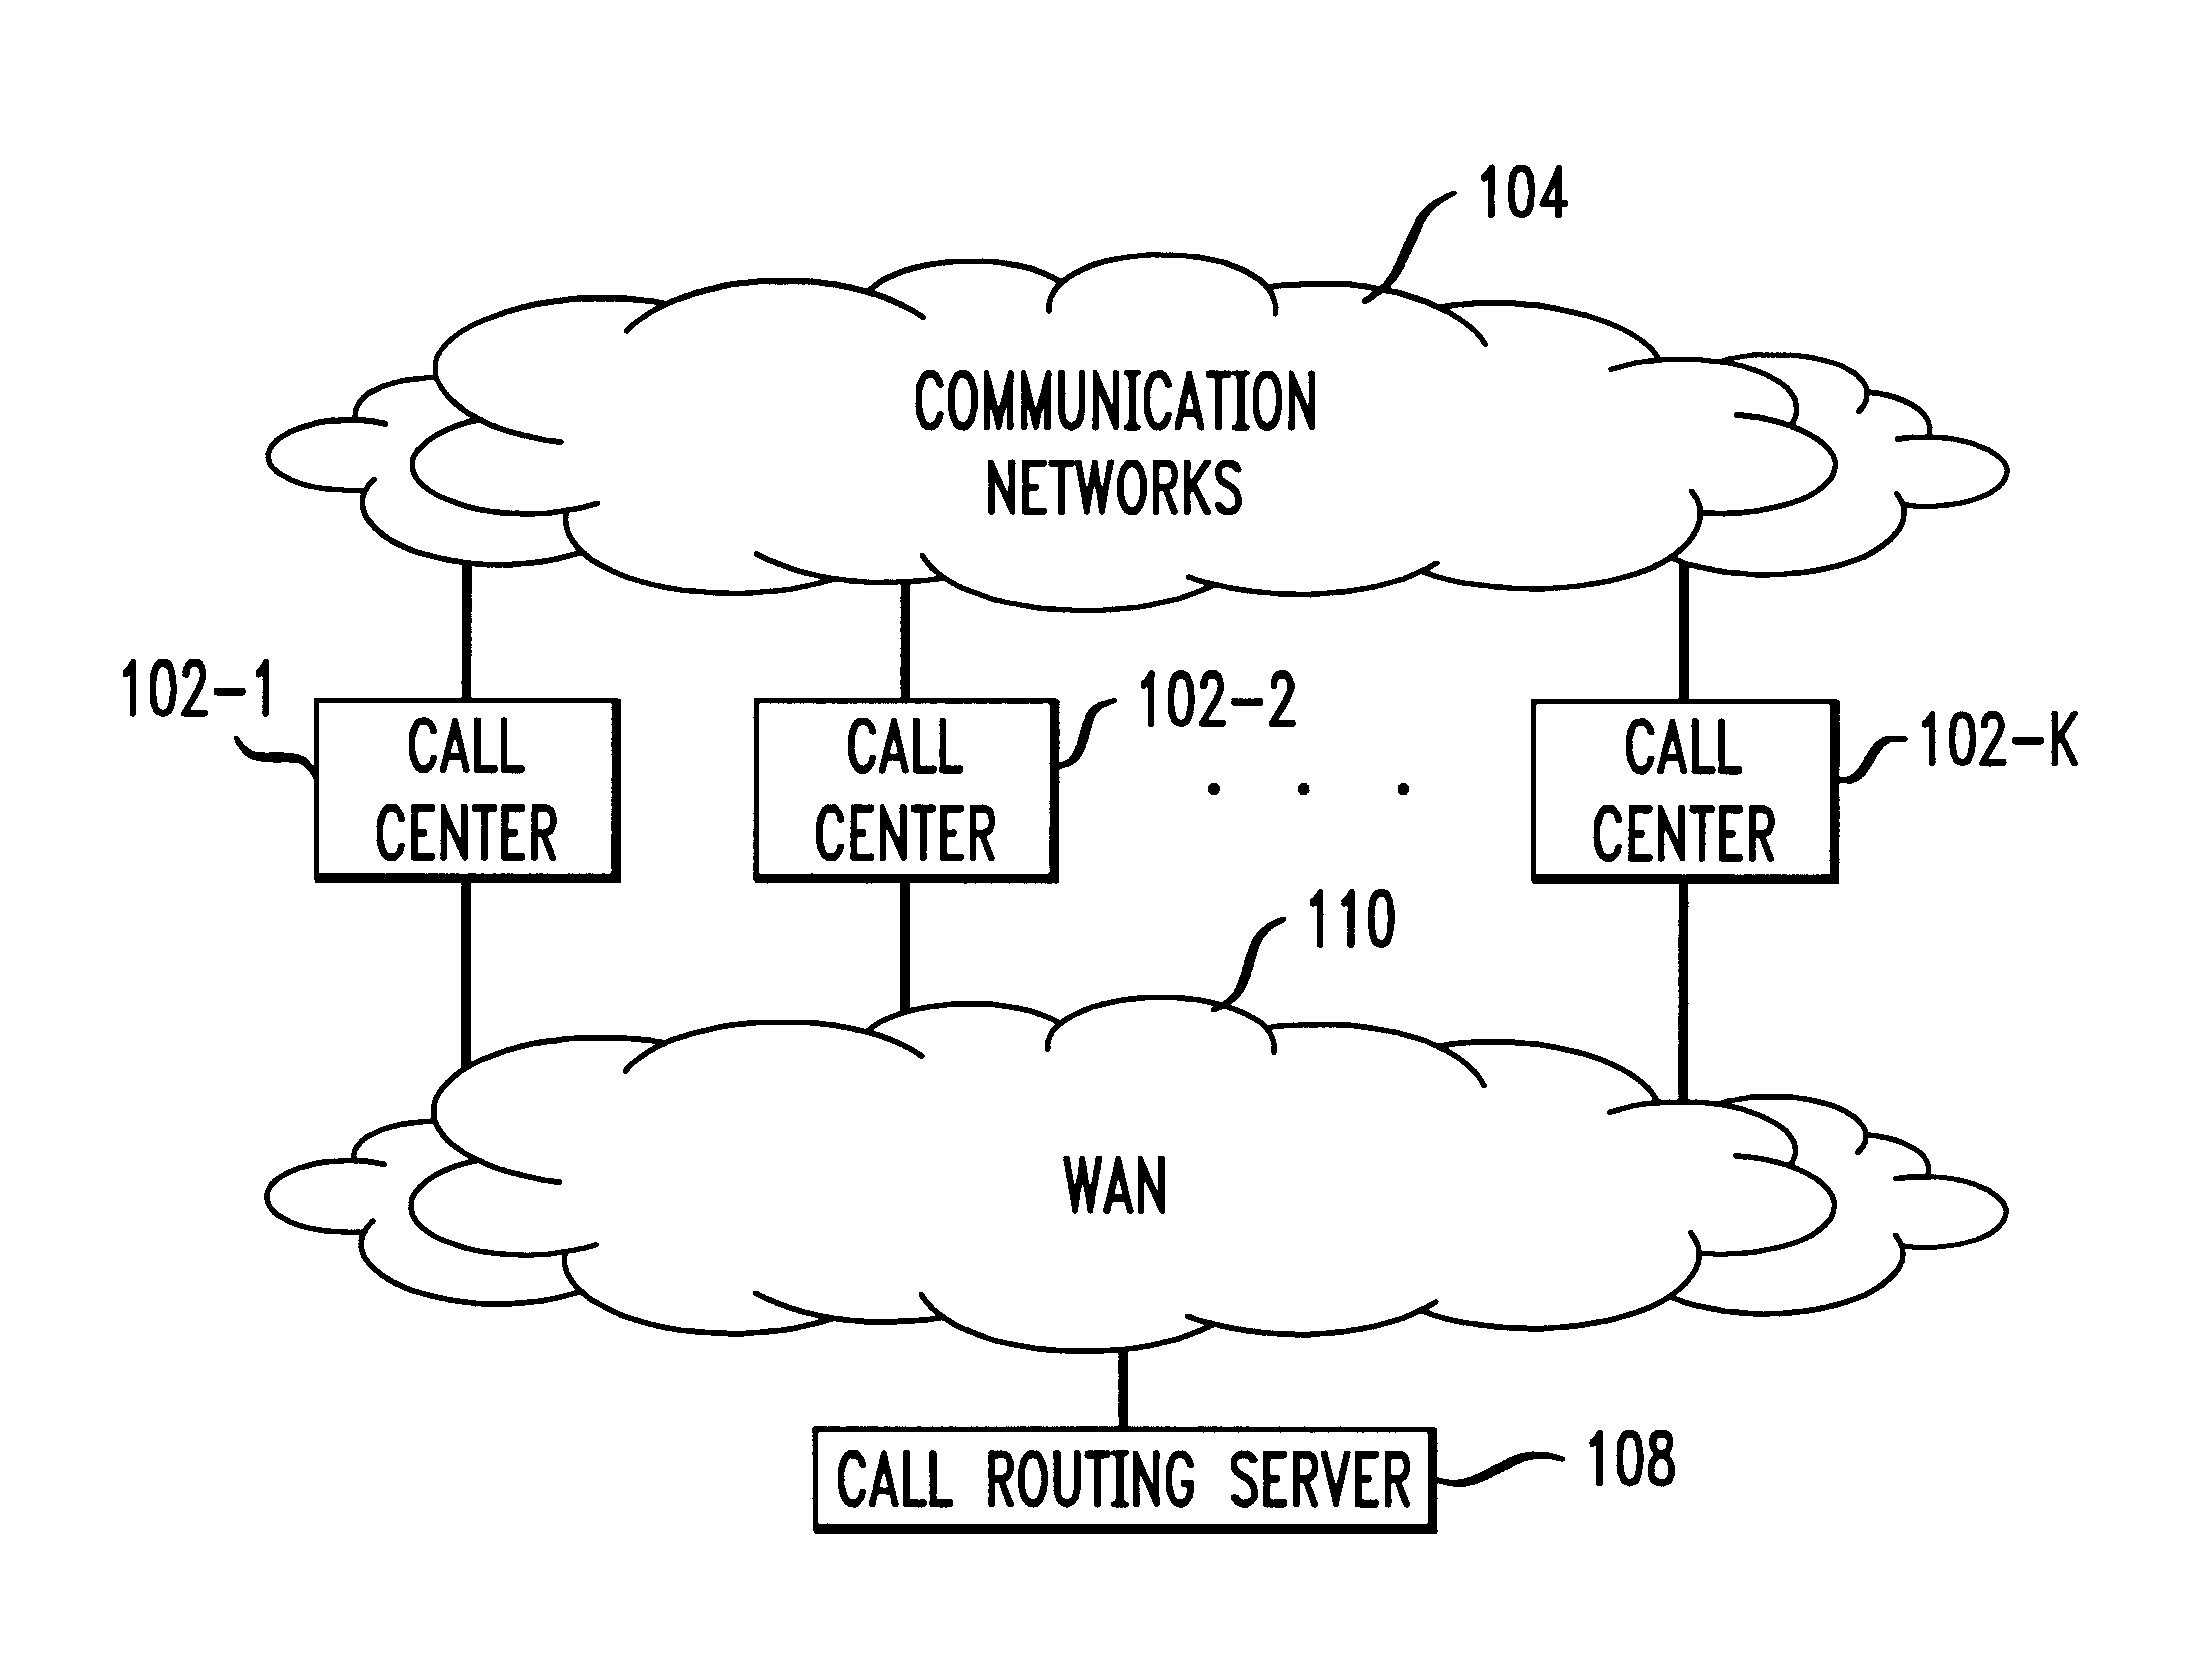 Technique for effectively processing and dynamically routing communication calls